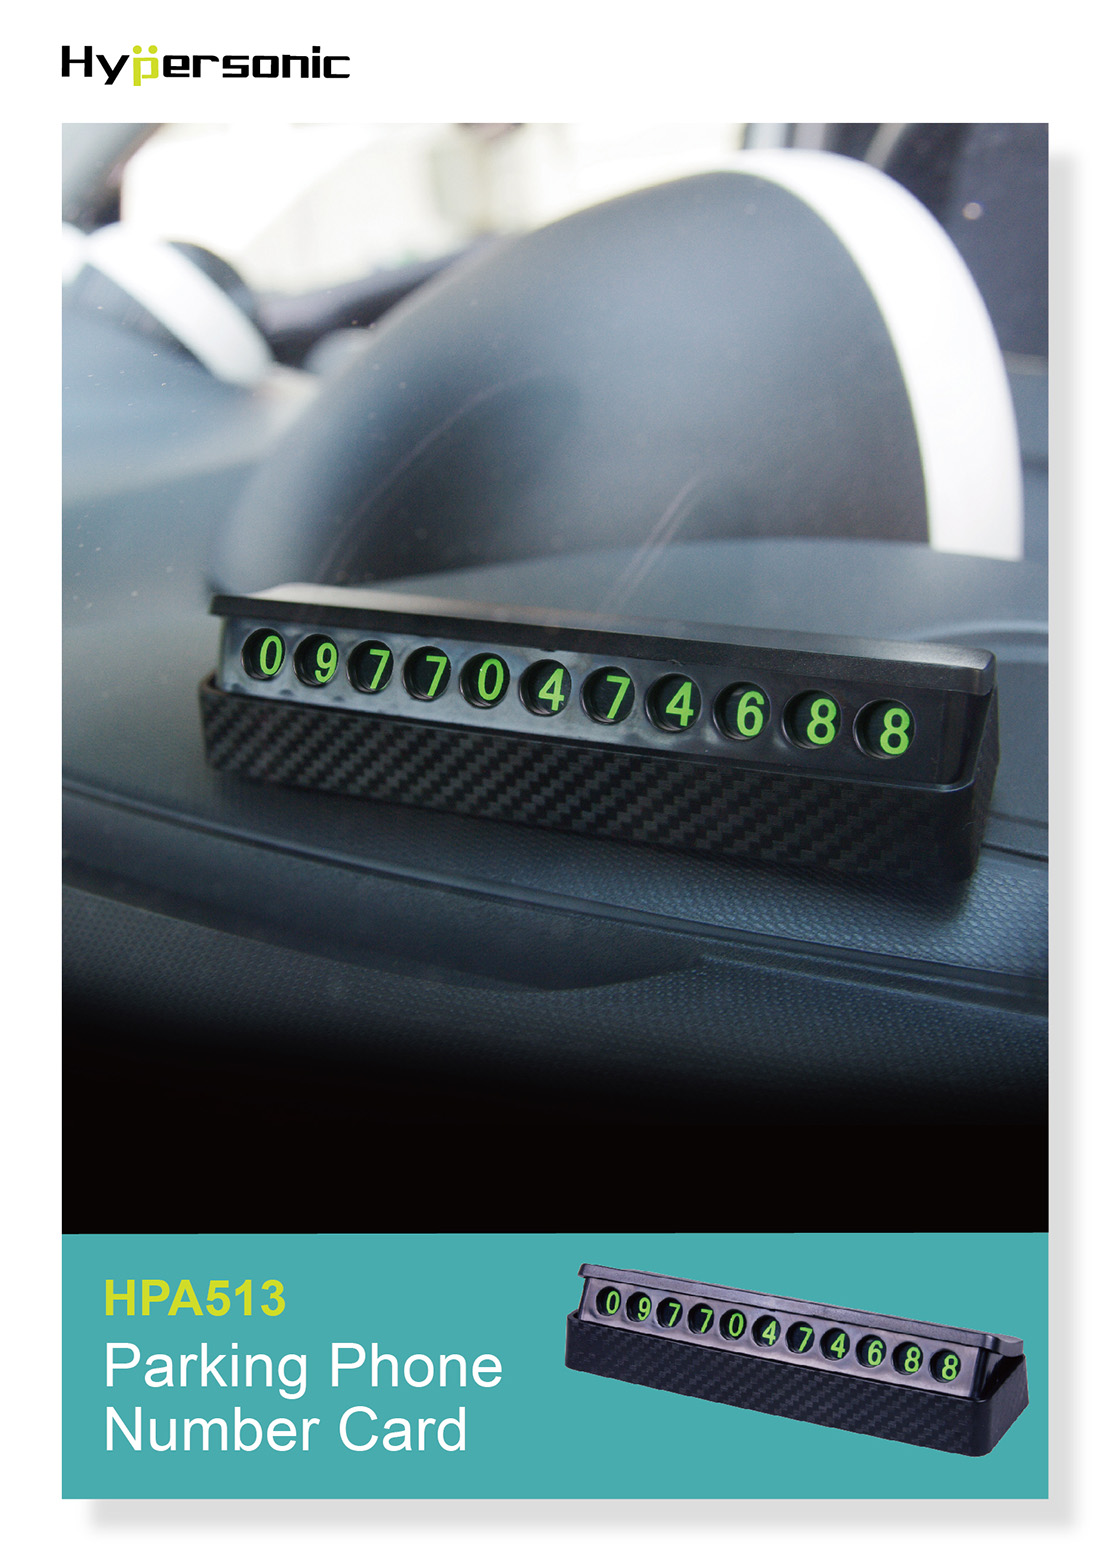 Parking Car Telephone Number Card HPA513